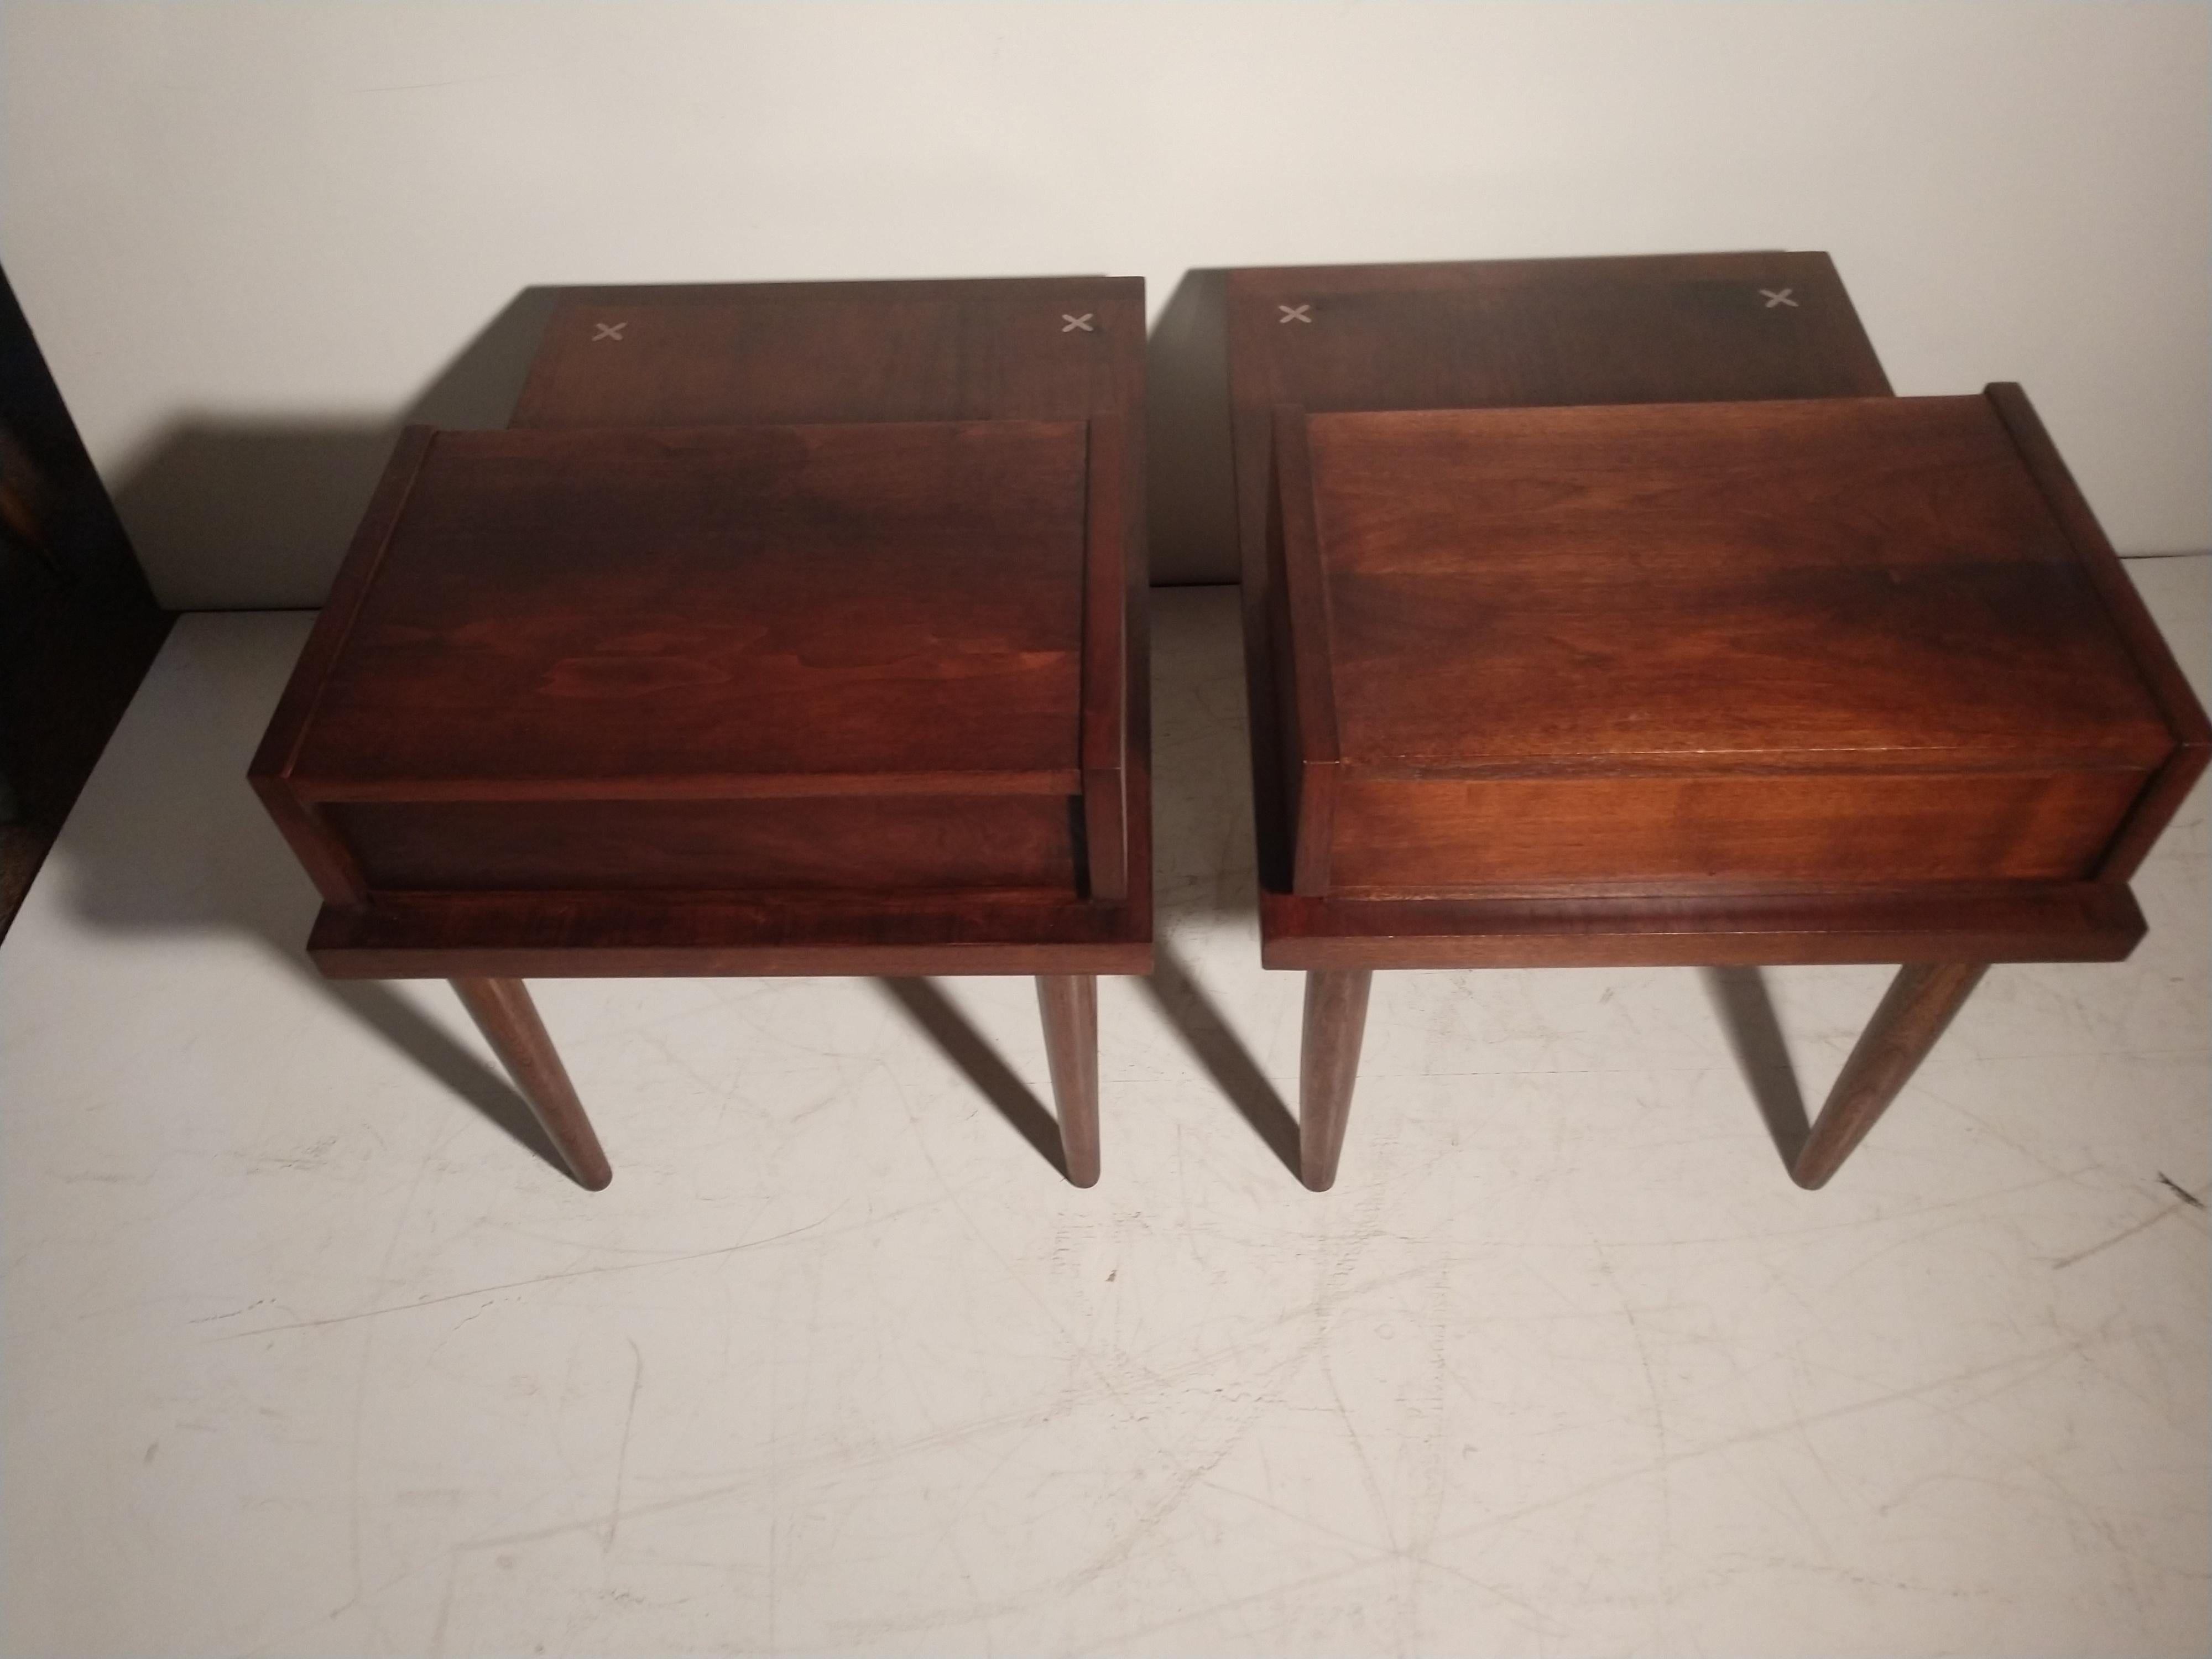 American Pair of Mid-Century Modern Mahogany End Tables by Merton Gershun For Sale